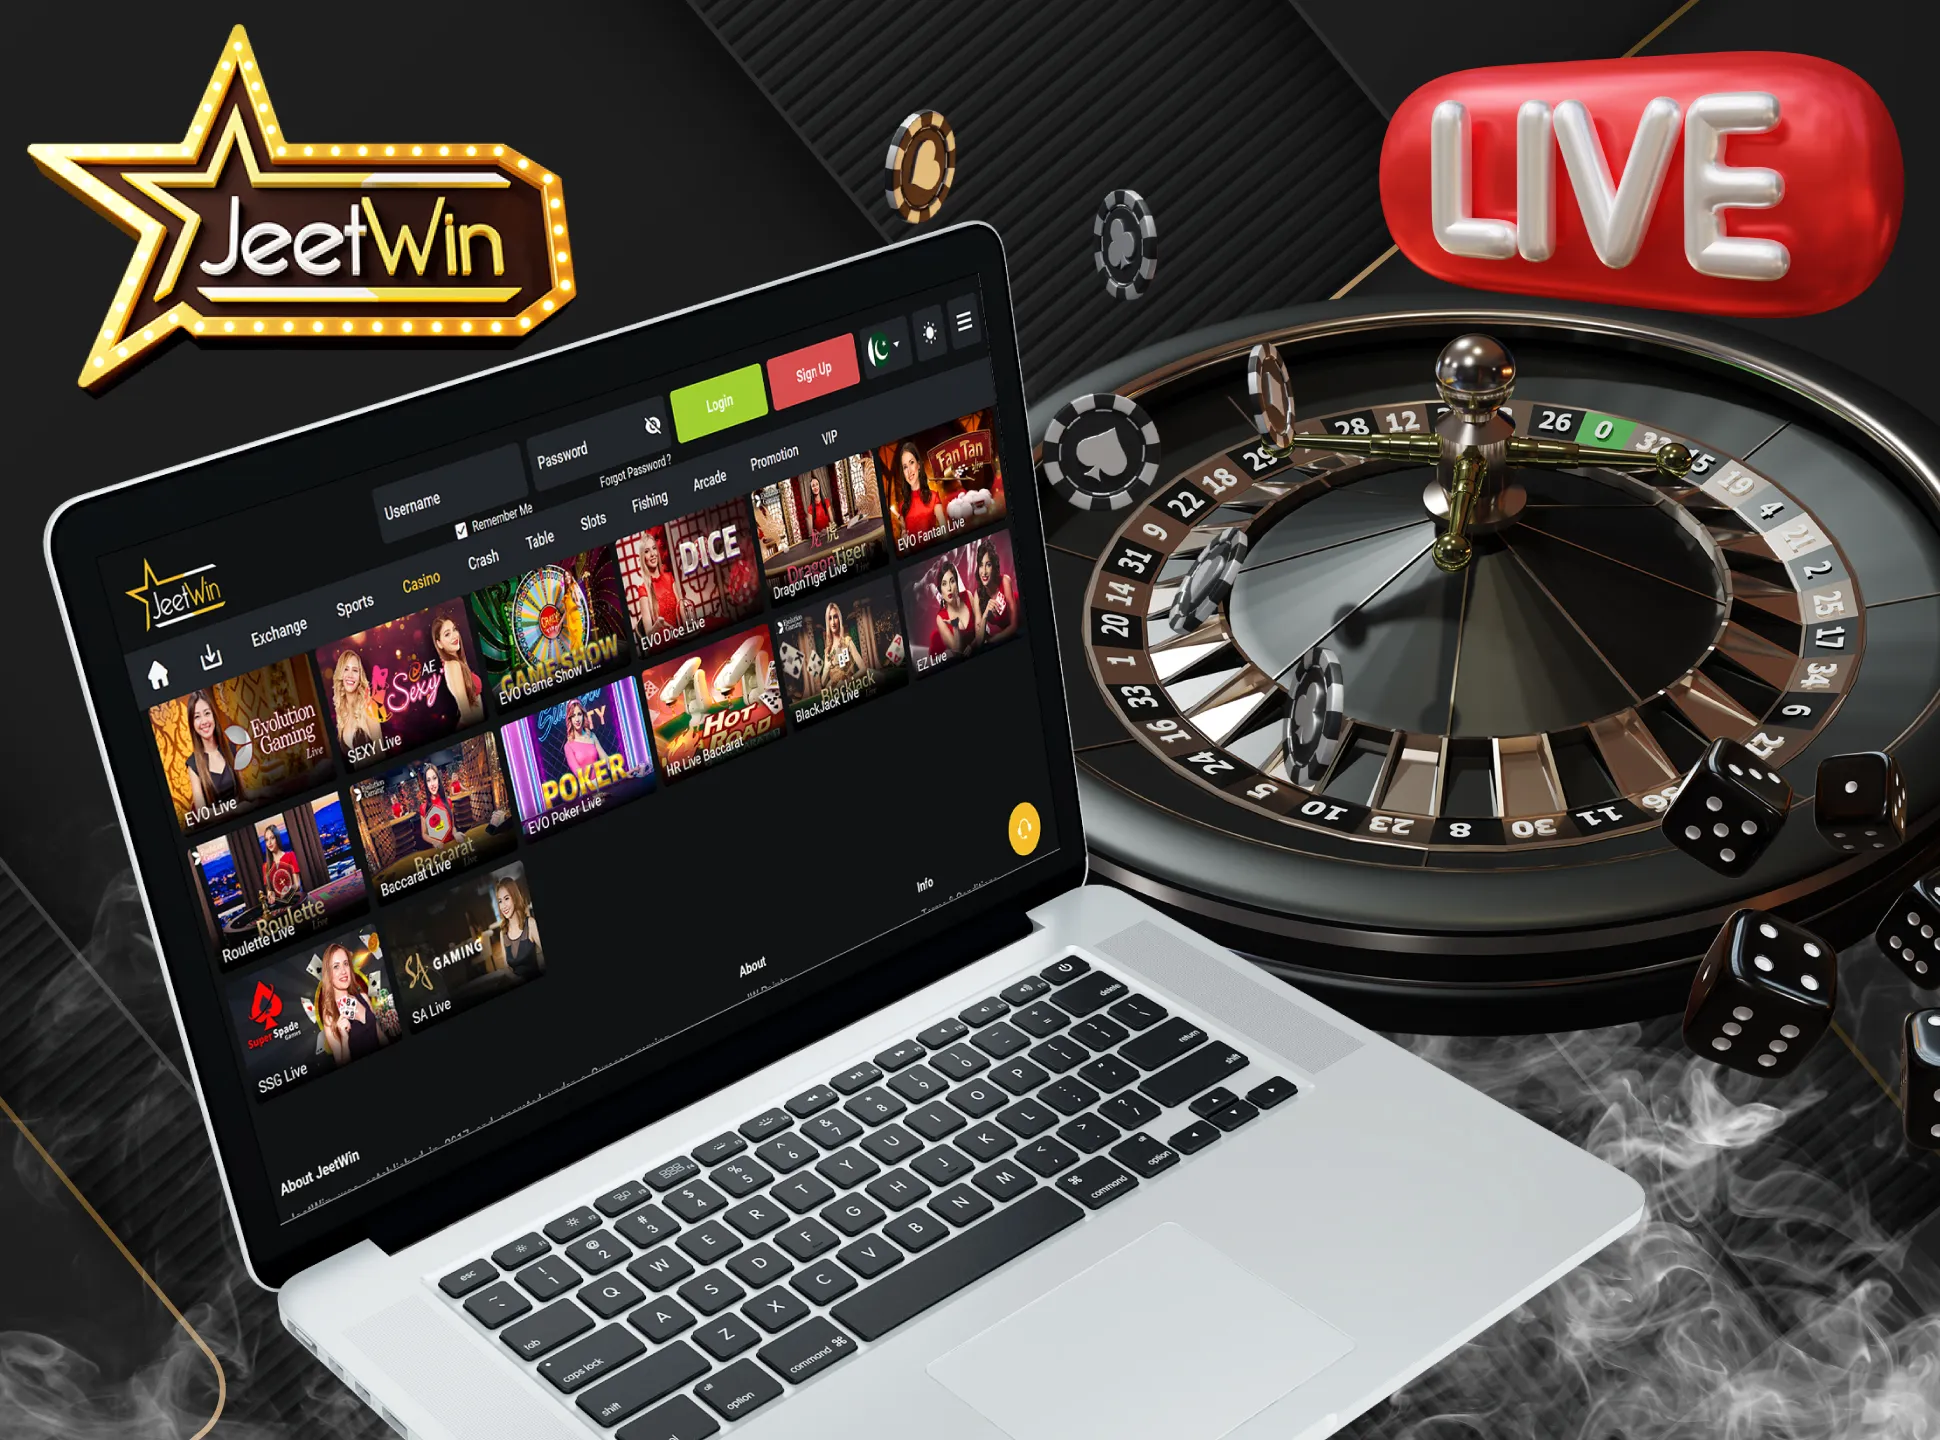 Play the most popular live casino games at JeetWin.